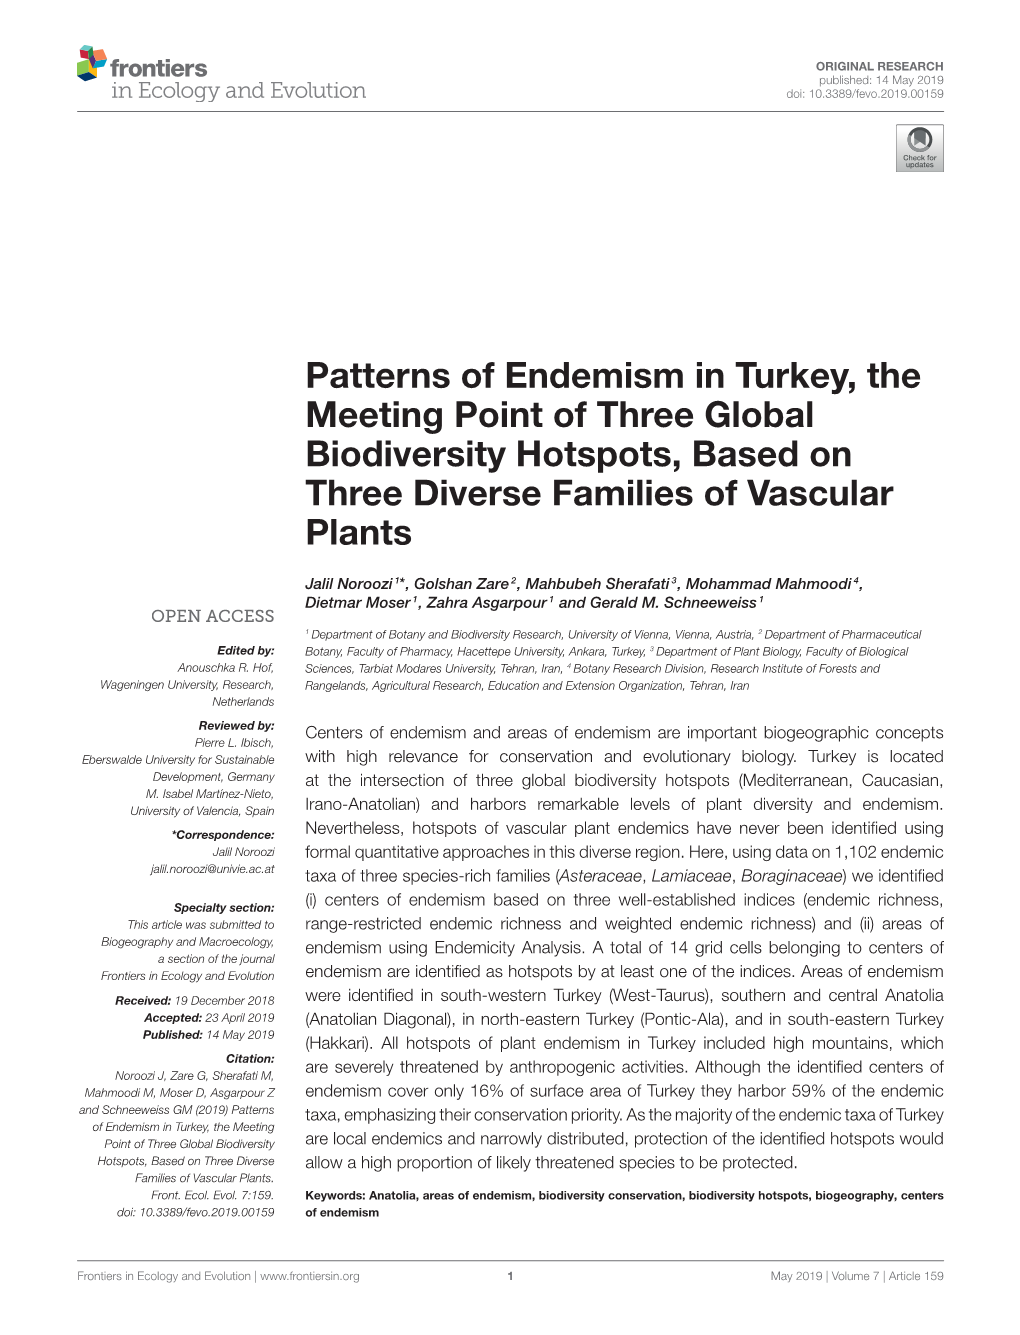 Patterns of Endemism in Turkey, the Meeting Point of Three Global Biodiversity Hotspots, Based on Three Diverse Families of Vascular Plants